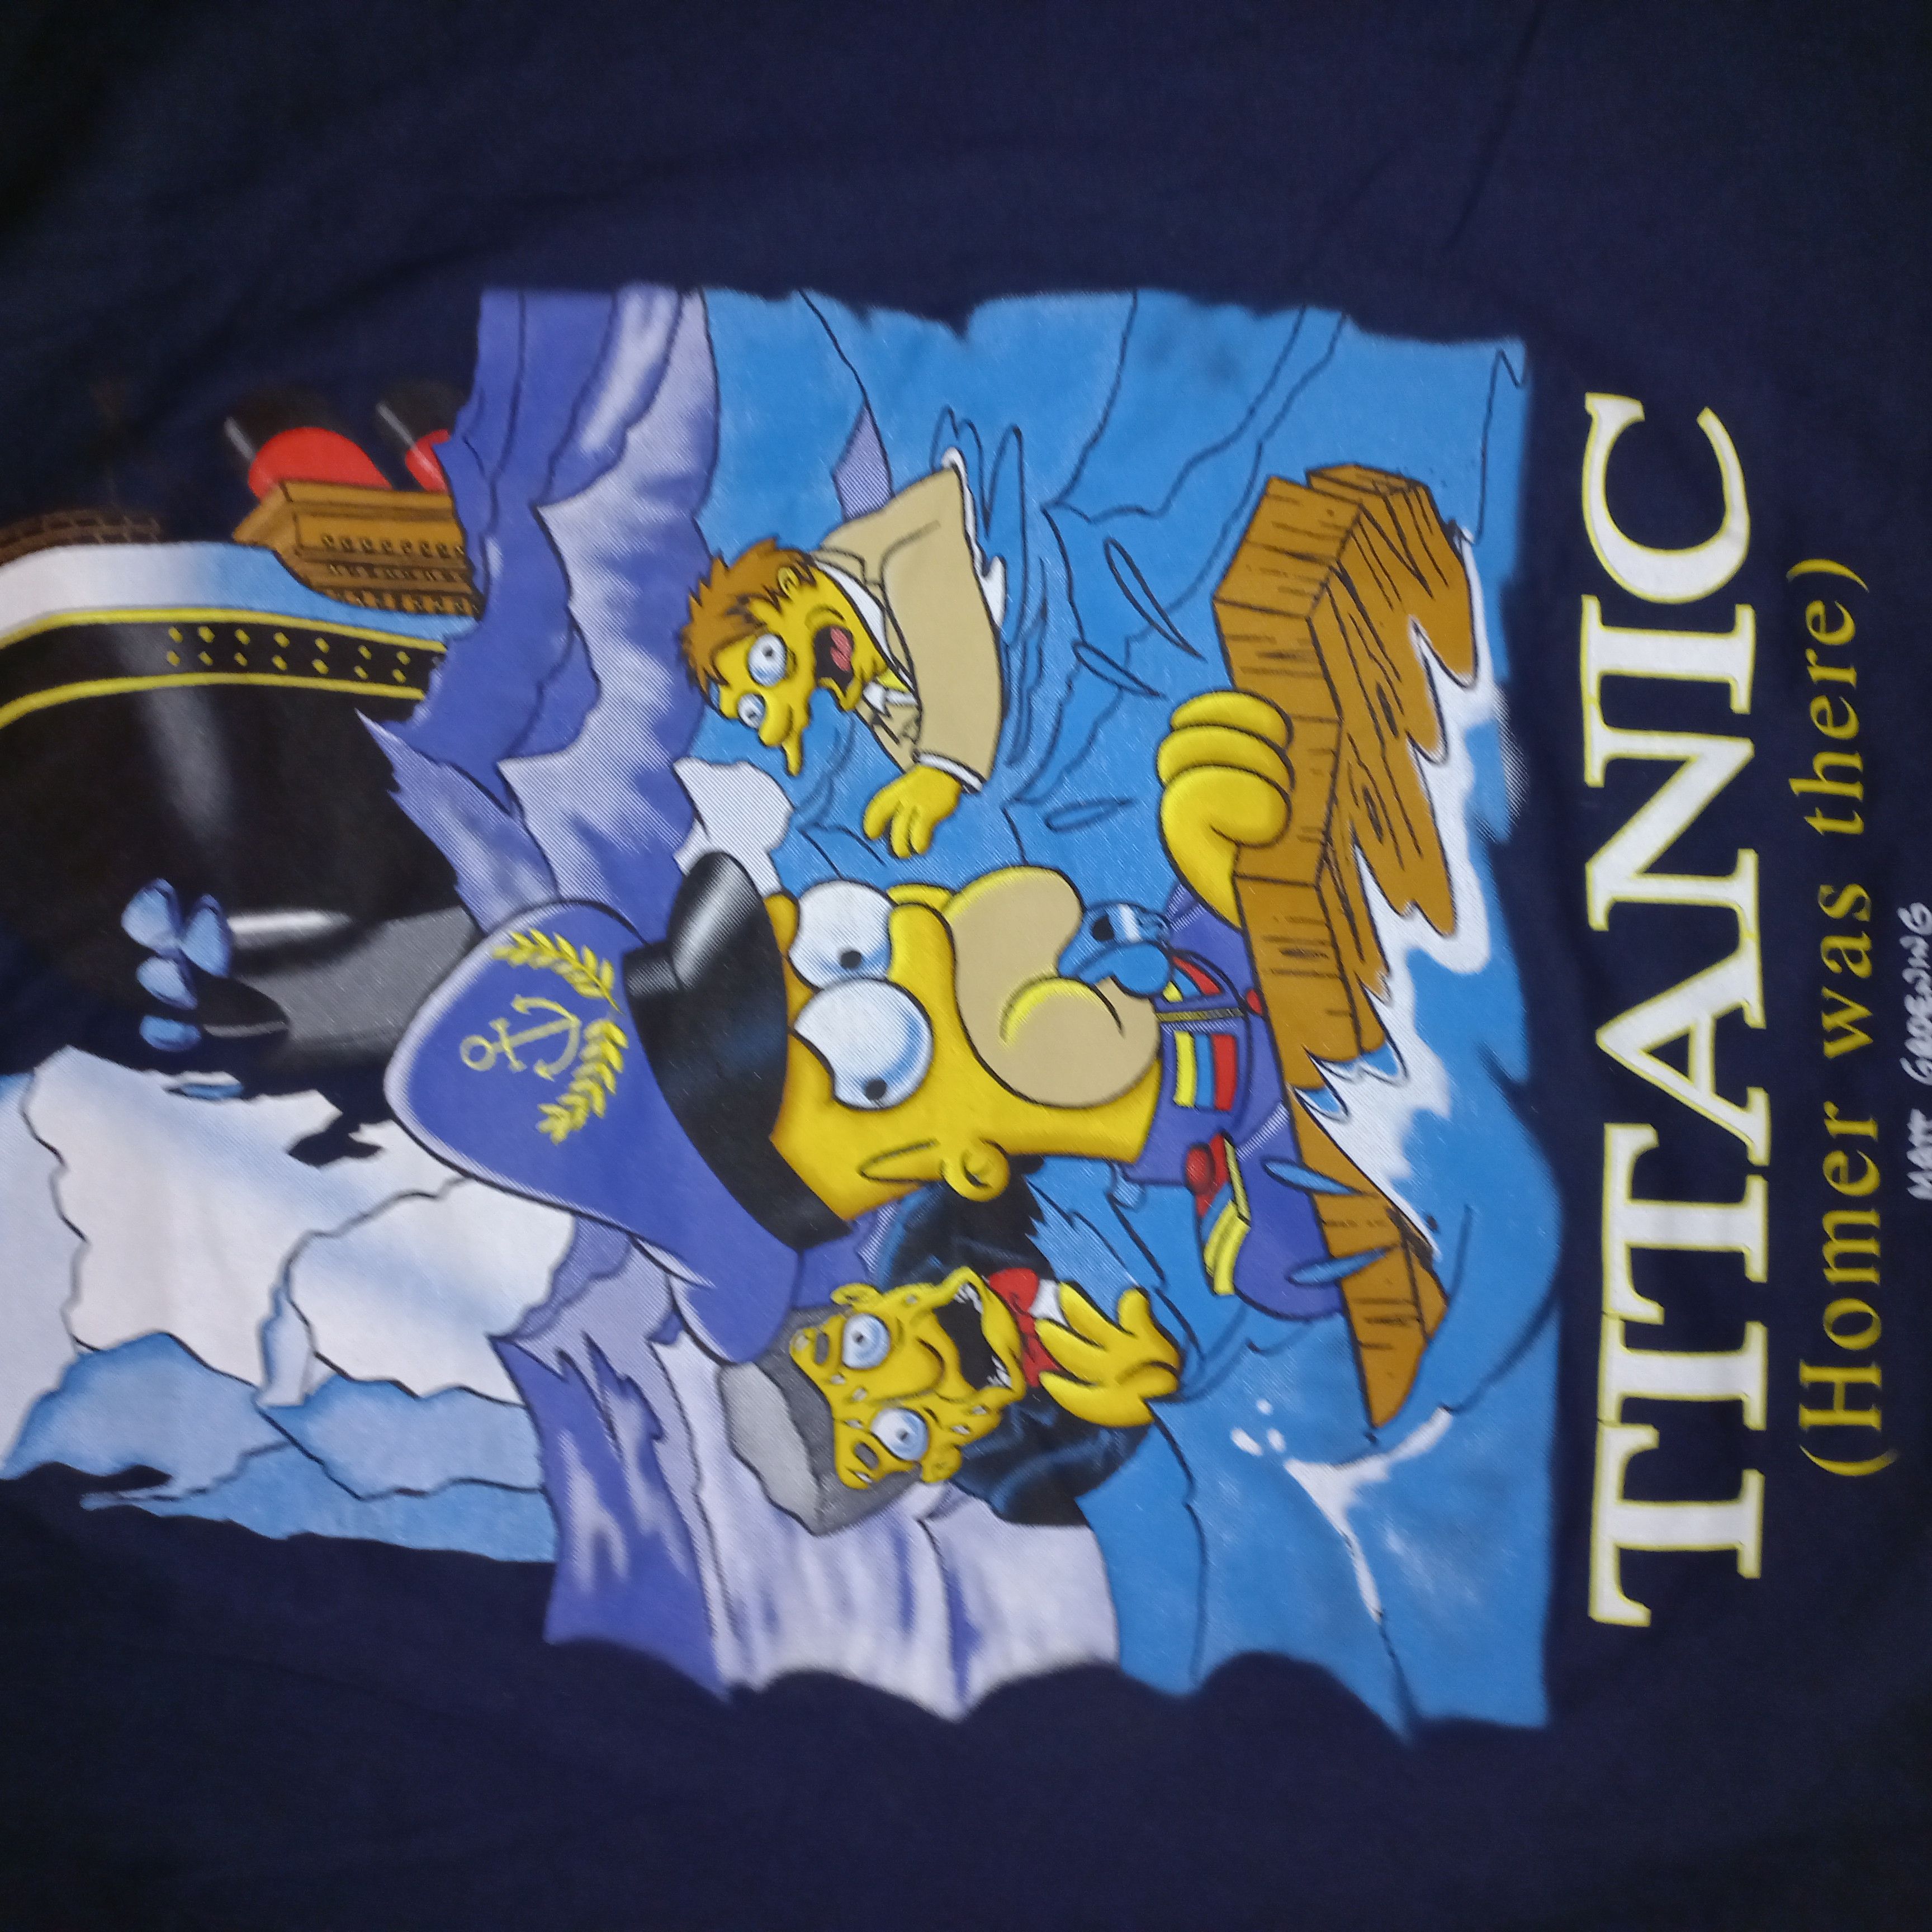 Rwd Redwood Vintage 1998 Titanic The Simpsons 'Homer Was There' Size US XL / EU 56 / 4 - 4 Thumbnail